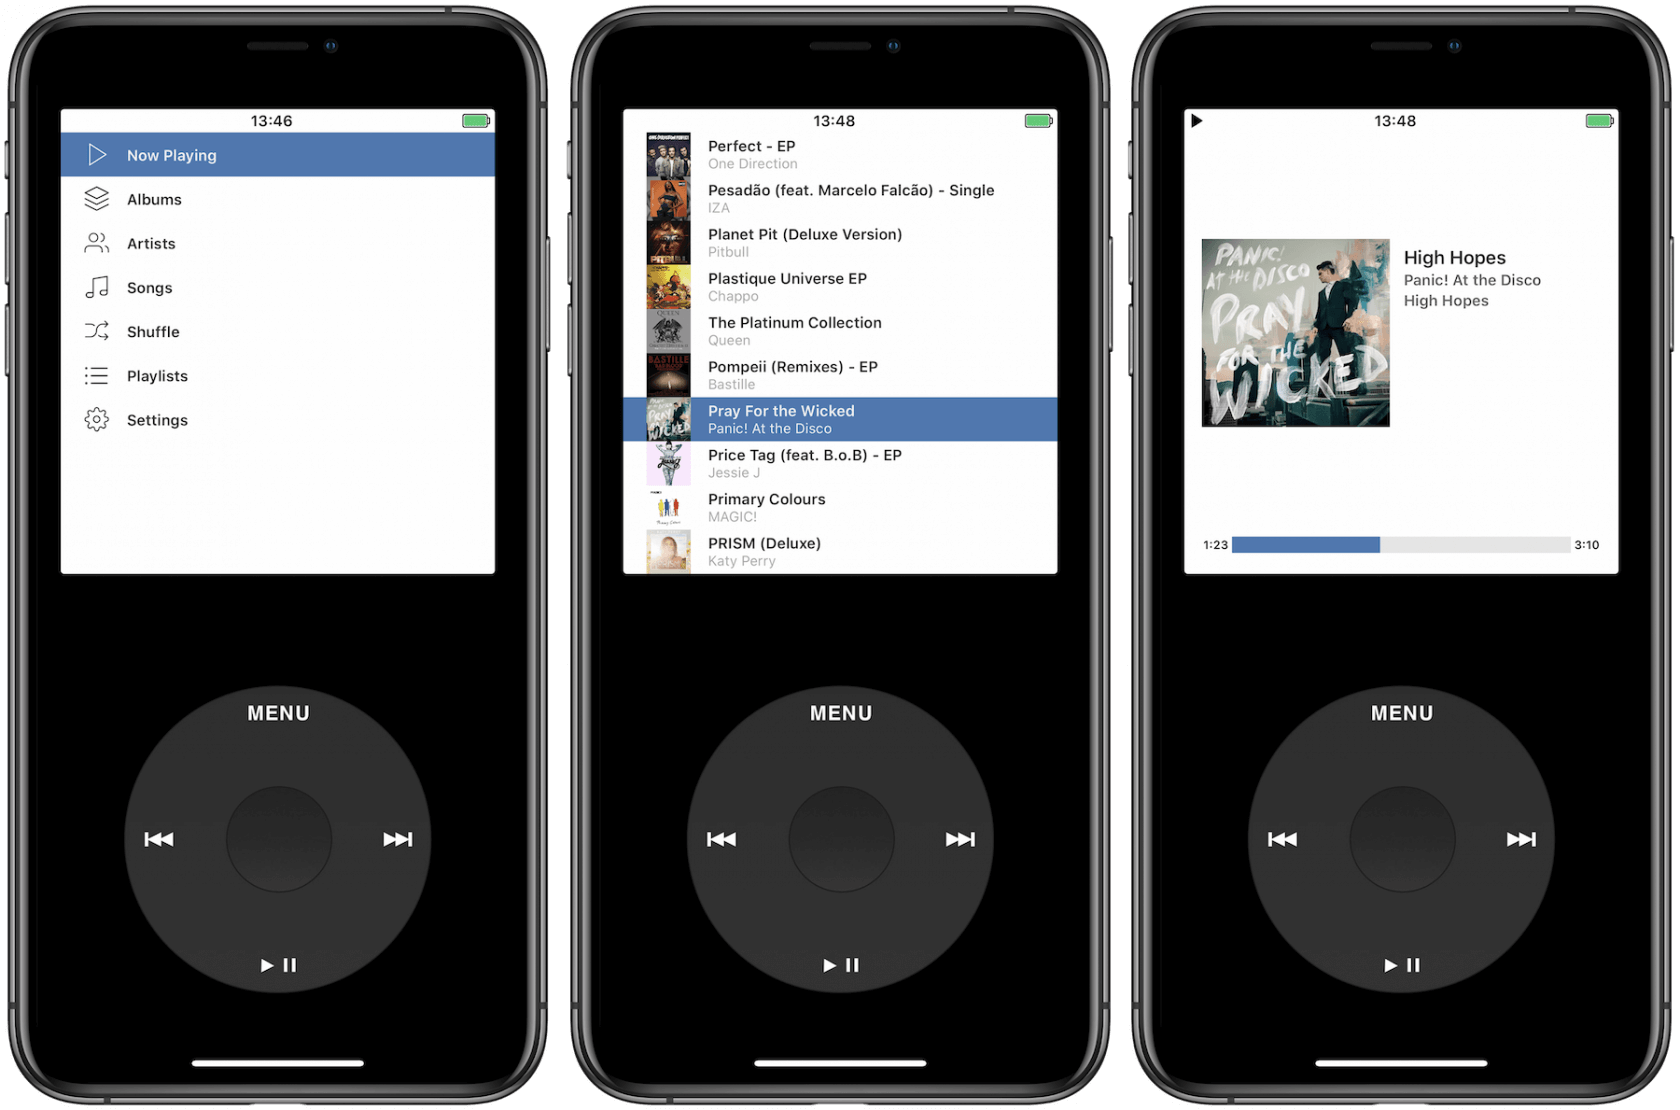 Convert your iPhone into a classic iPod with this app